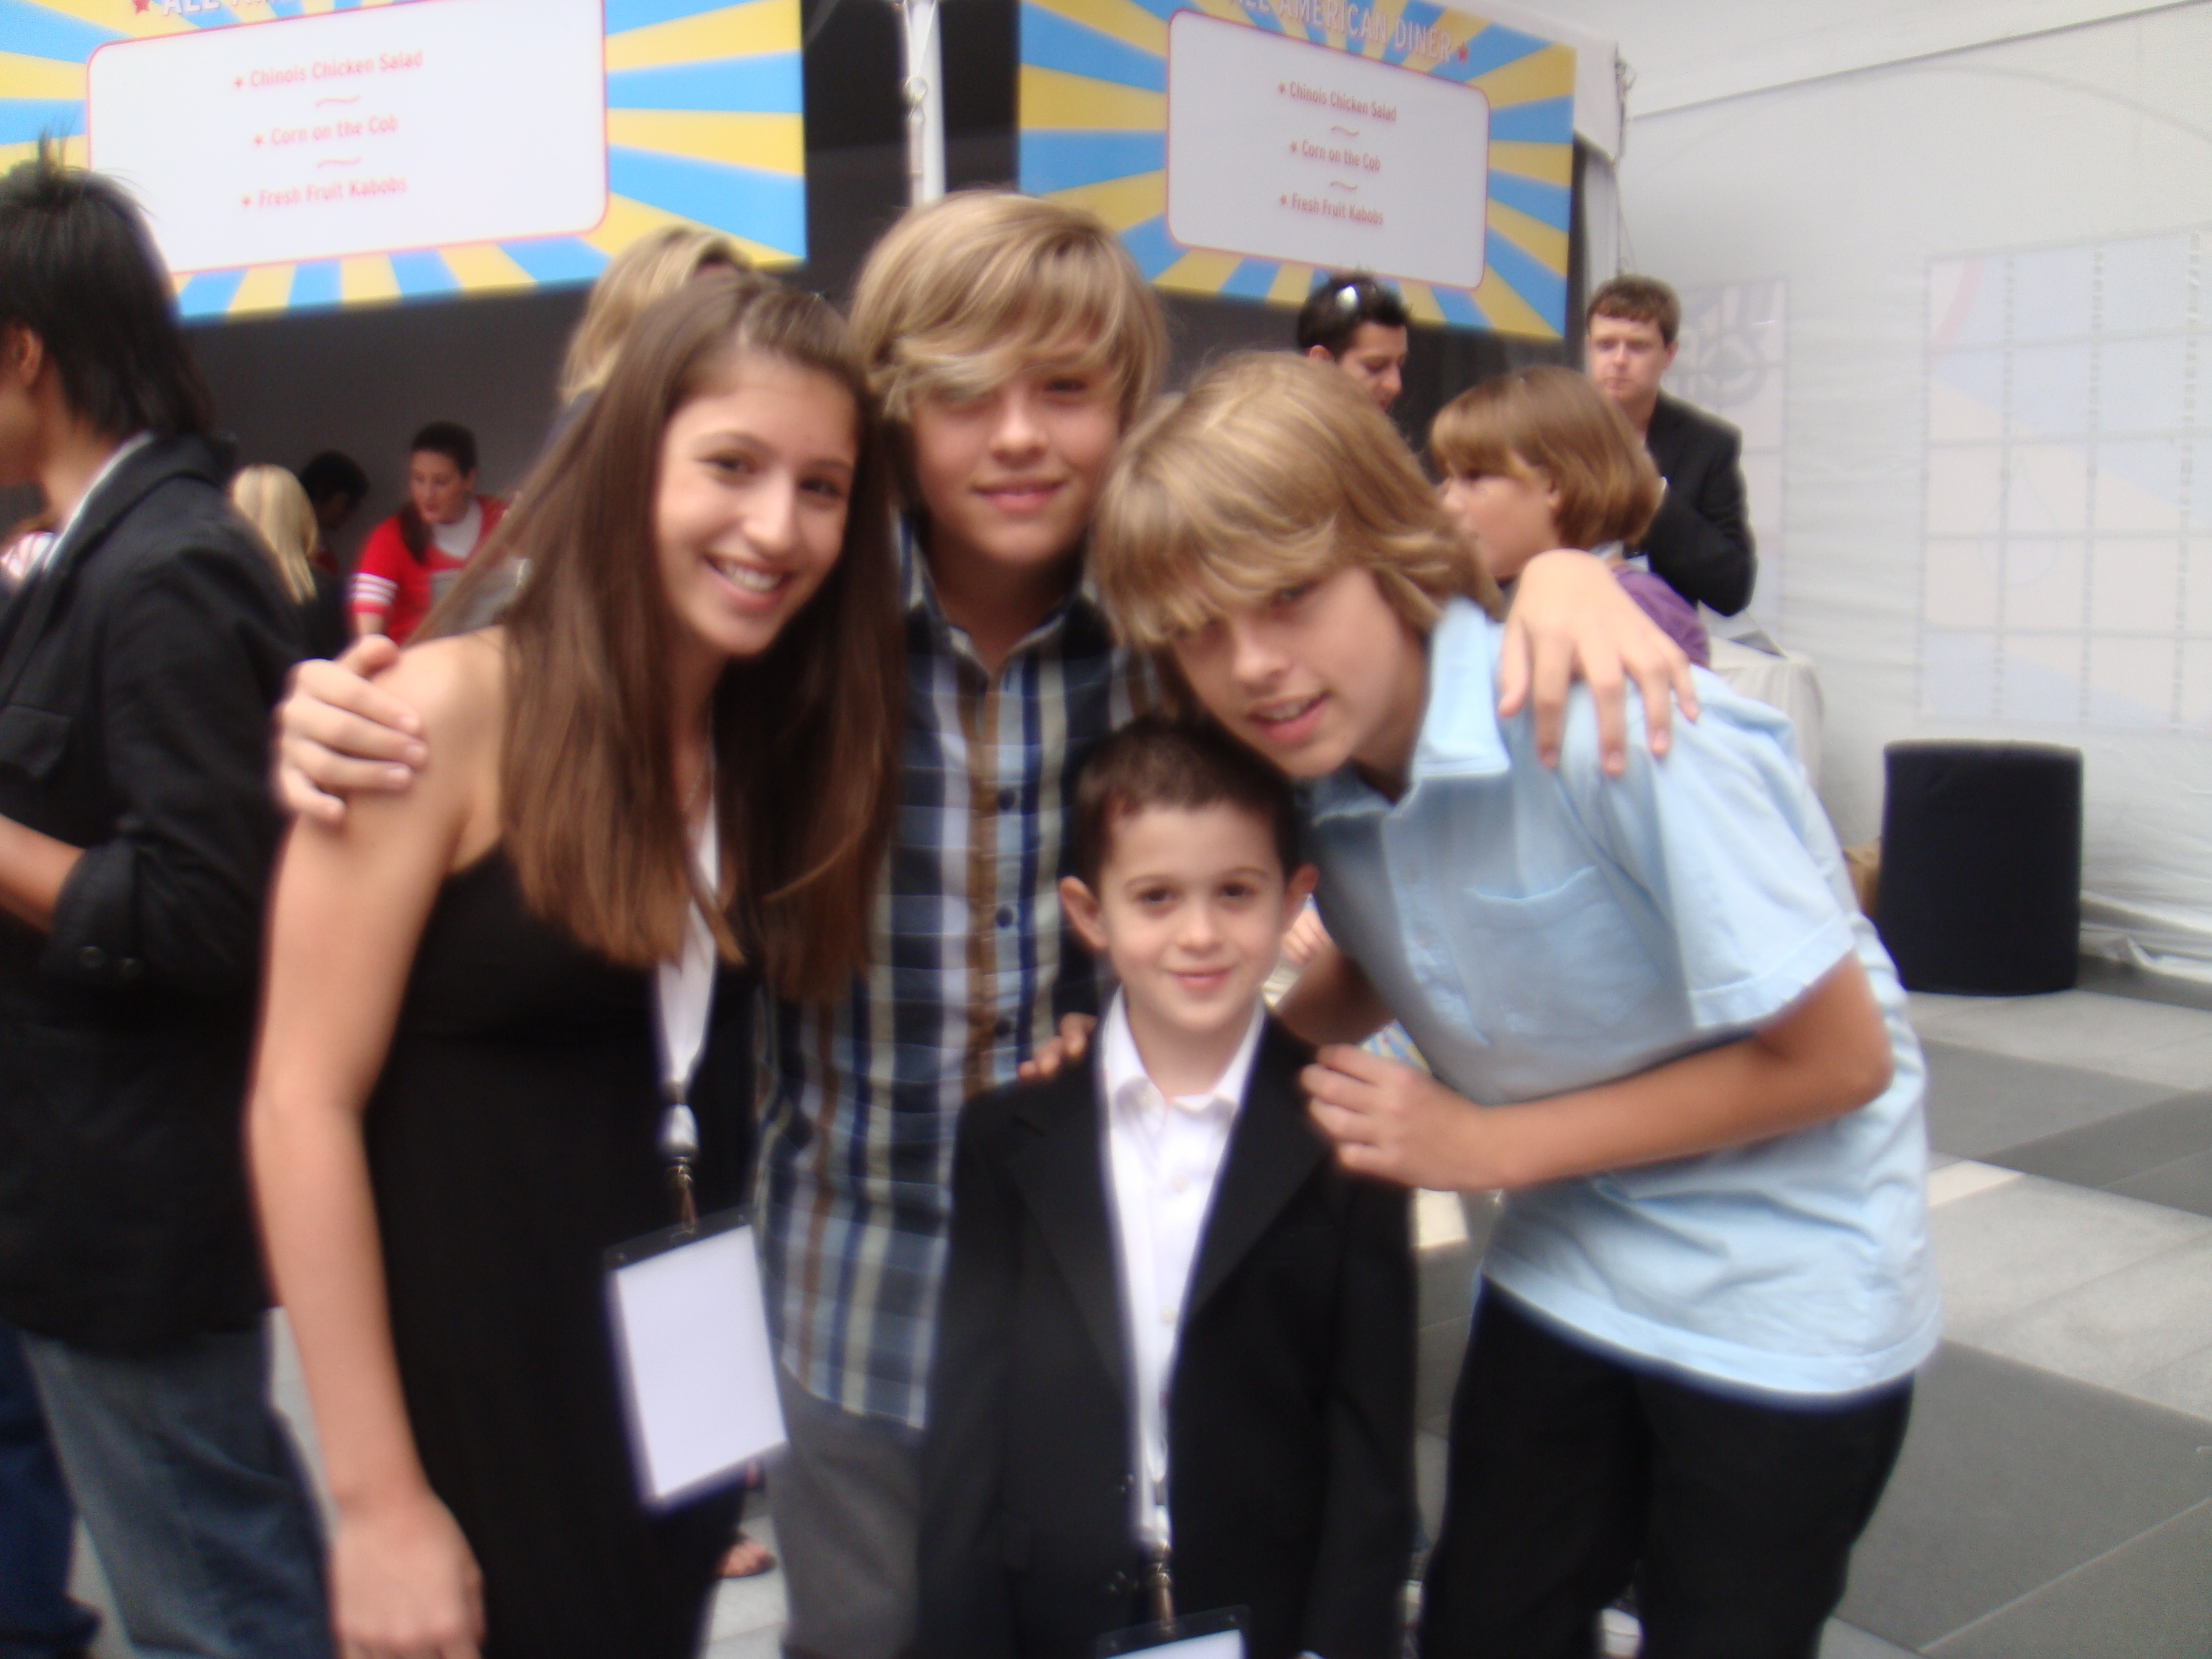 Isabella Astor, Dylan Sprouse, Andrew Astor & Cole Sprouse - Ambassadors for Variety Power of Youth 2008